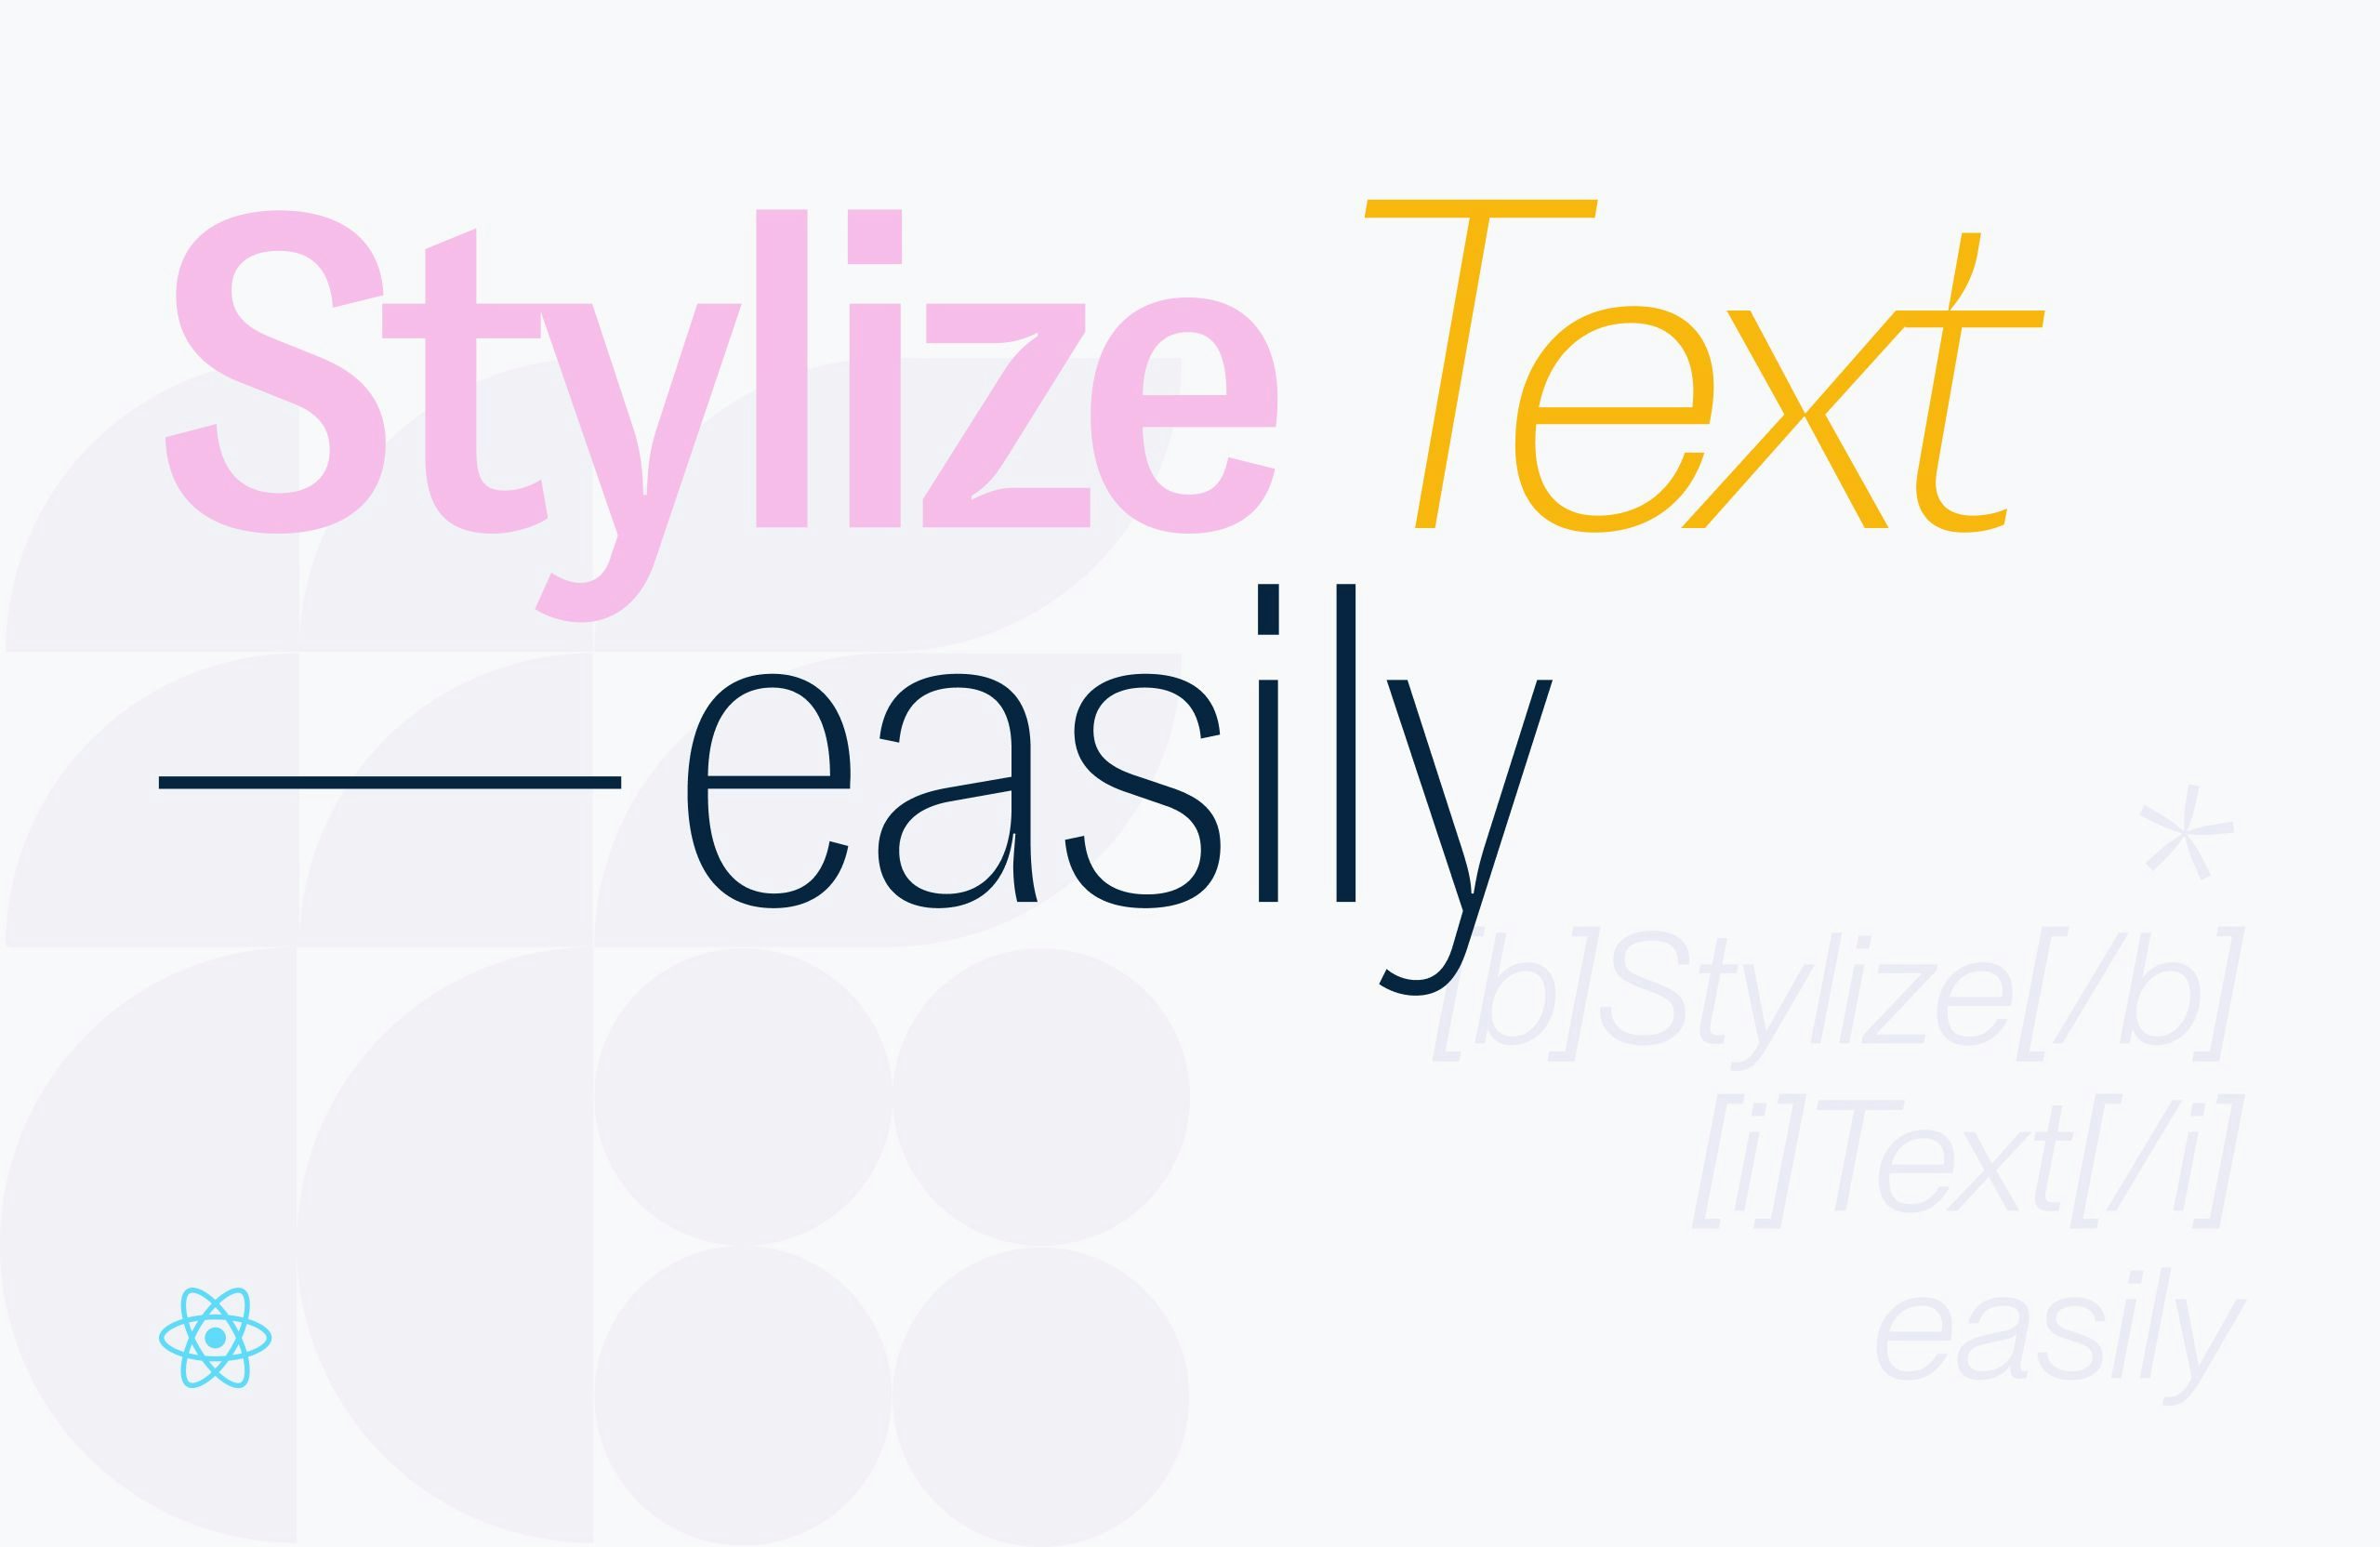 Cover of "Stylize text easily" article